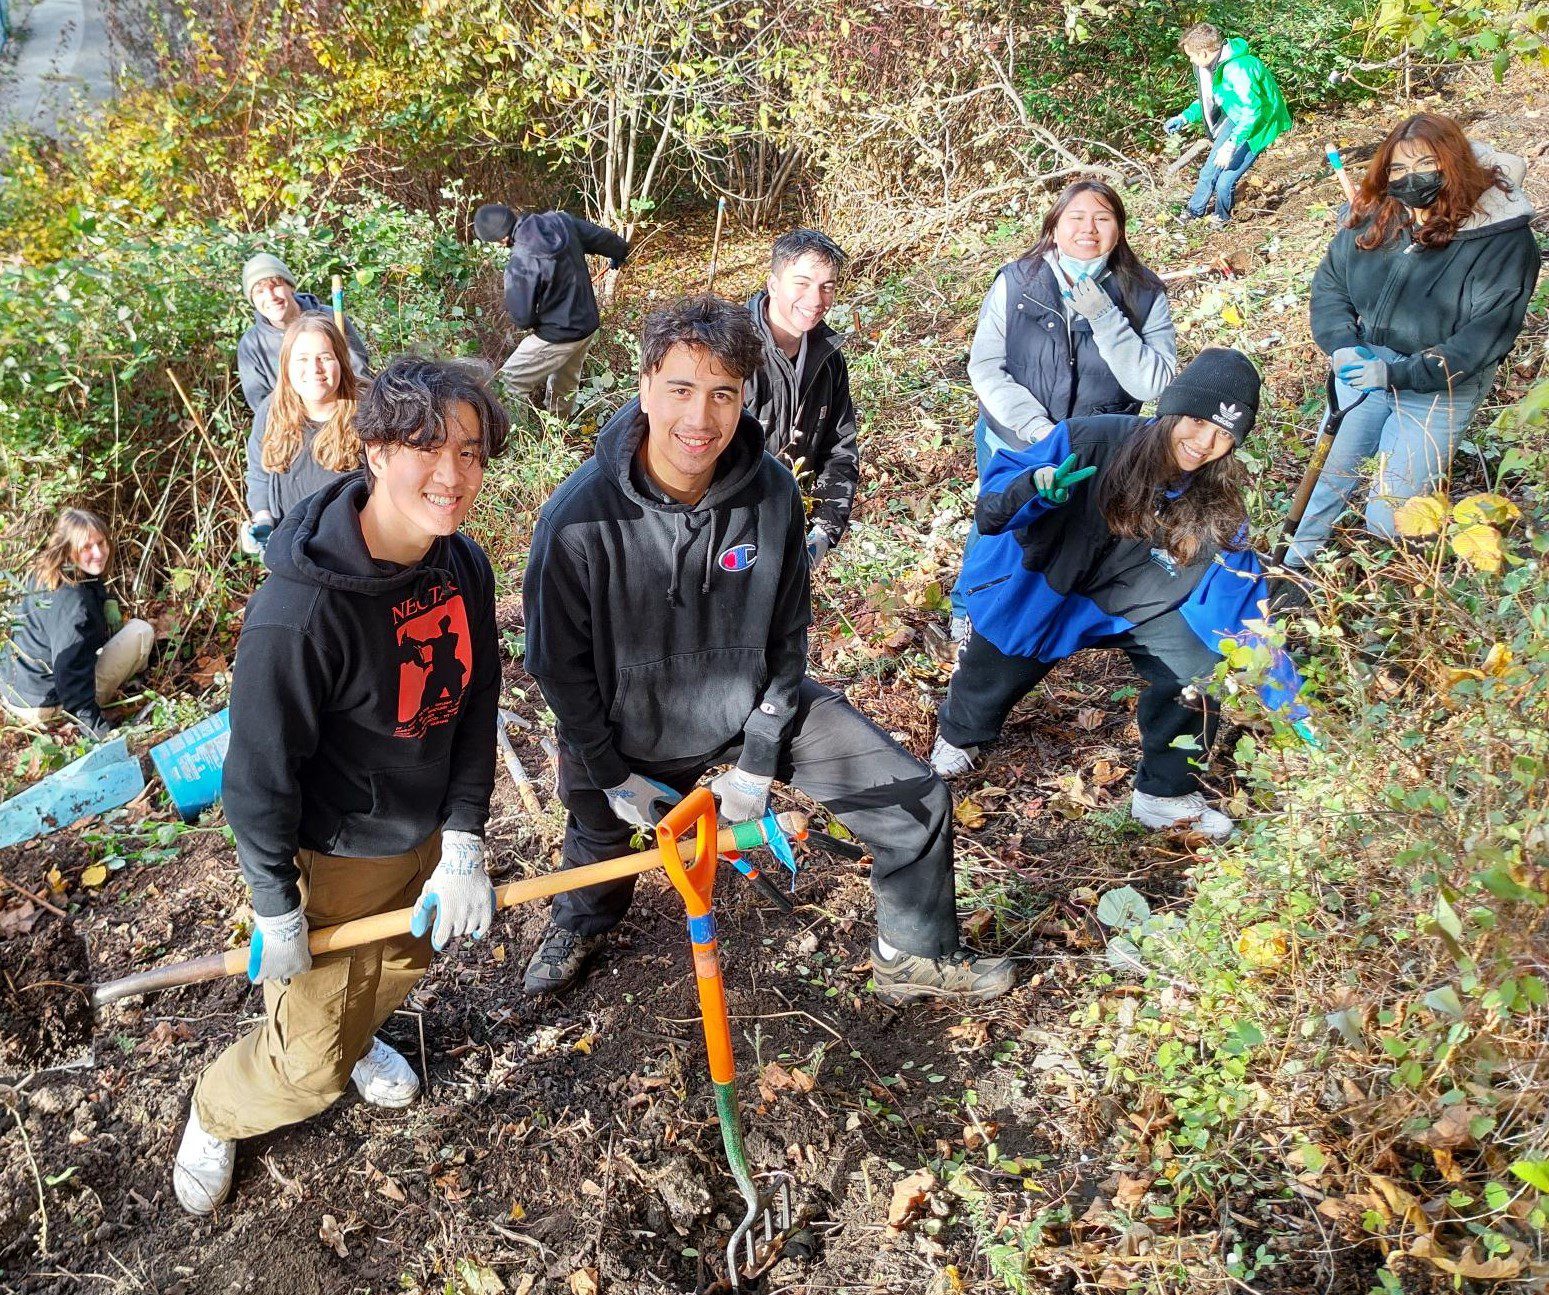 Group of volunteers posing for a photo on a hillside while holding tools.